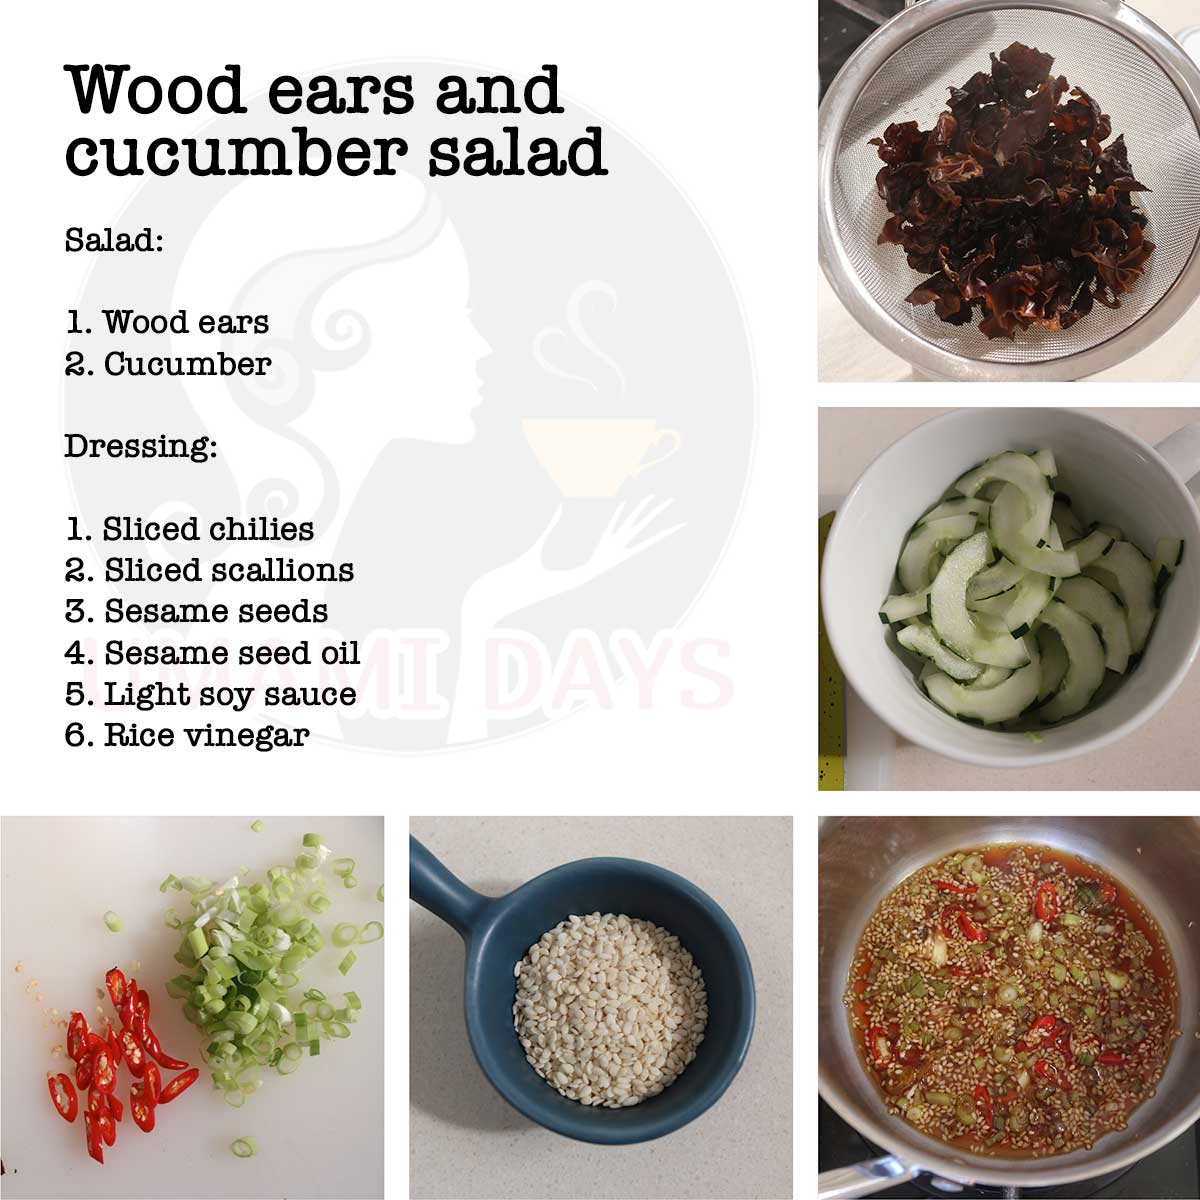 List of ingredients for Wood ears and cucumber salad